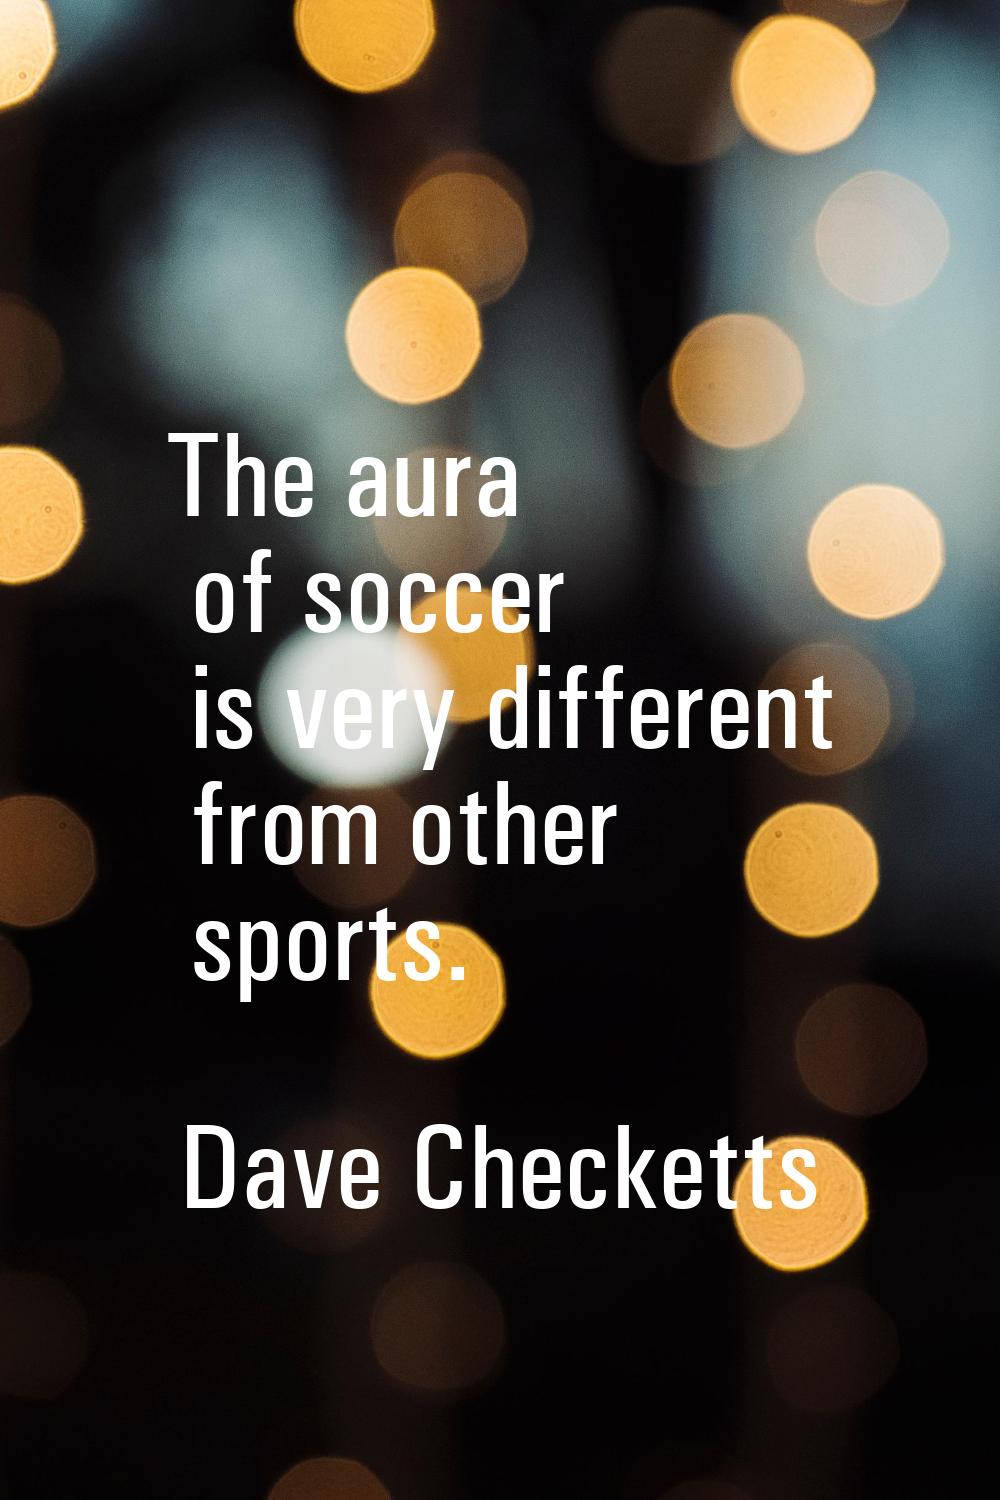 The aura of soccer is very different from other sports.